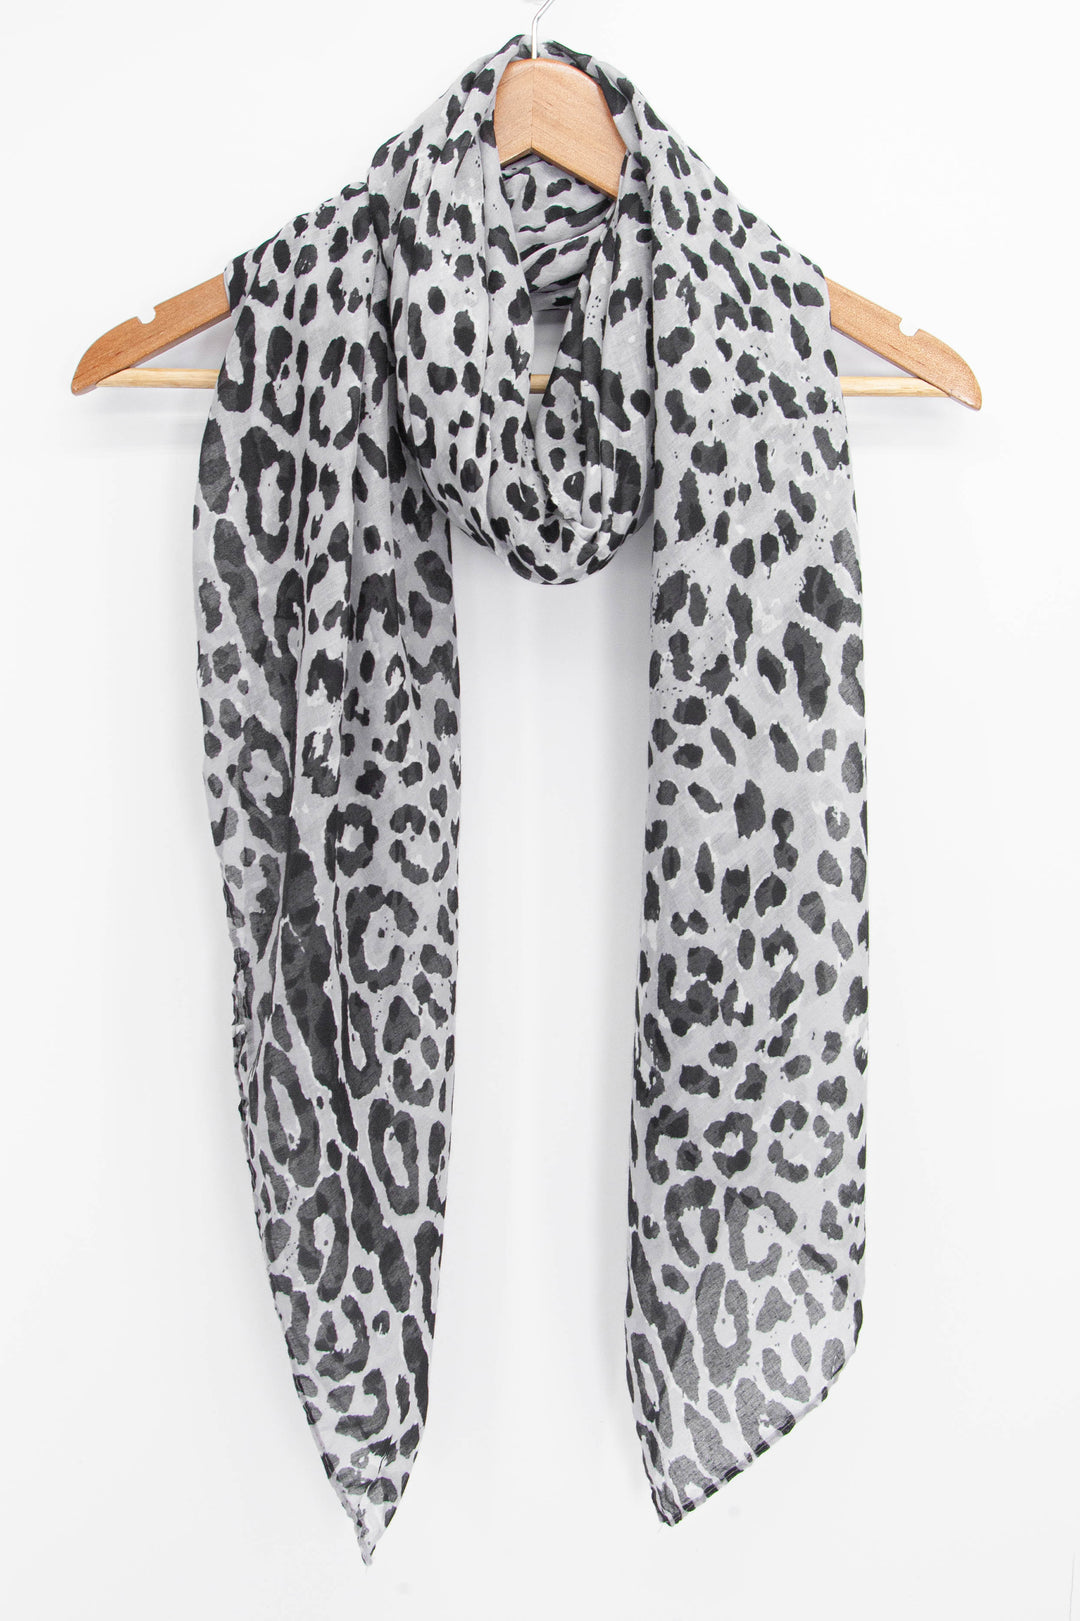 All Over Leopard Print Scarf with Lined Border in Black